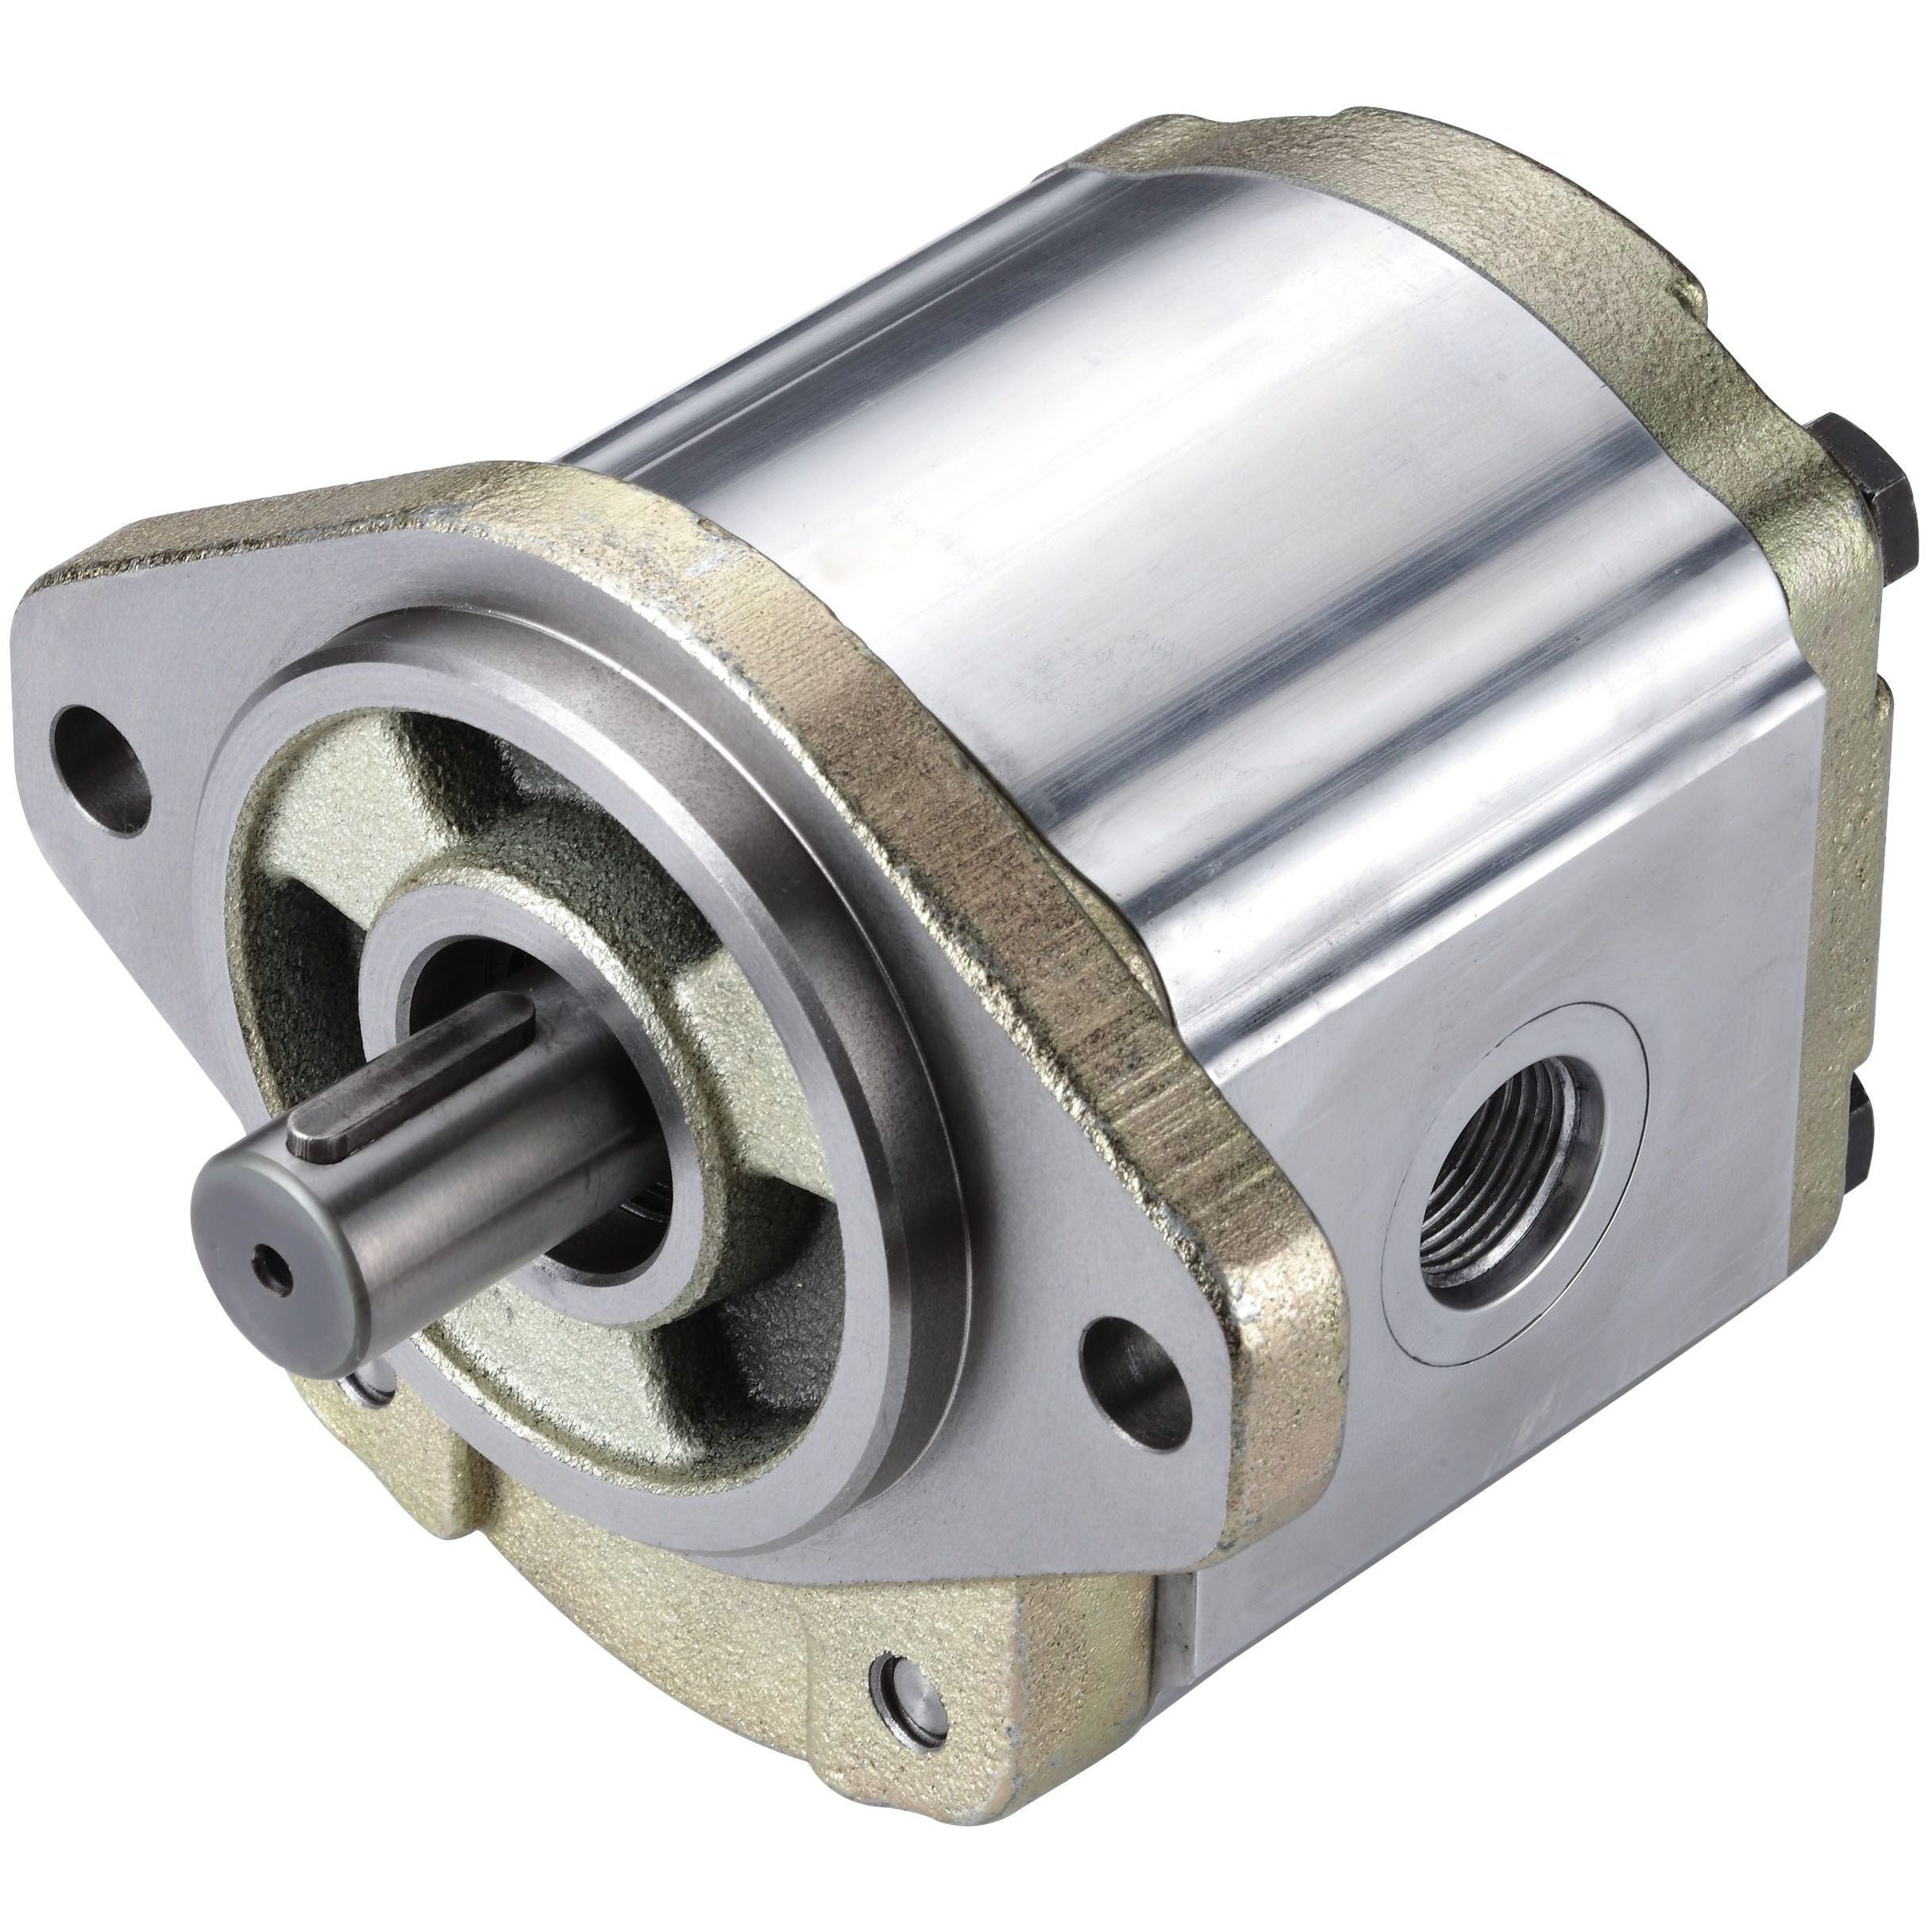 3GB8U133L : Honor Gear Pump, CCW Rotation, 33cc (2.01in3), 15.69 GPM, 3500psi, 3000 RPM, #16 SAE (1") In, #16 SAE (1") Out, Splined Shaft 13-Tooth, 16/32 Pitch, SAE B 2-Bolt Mount